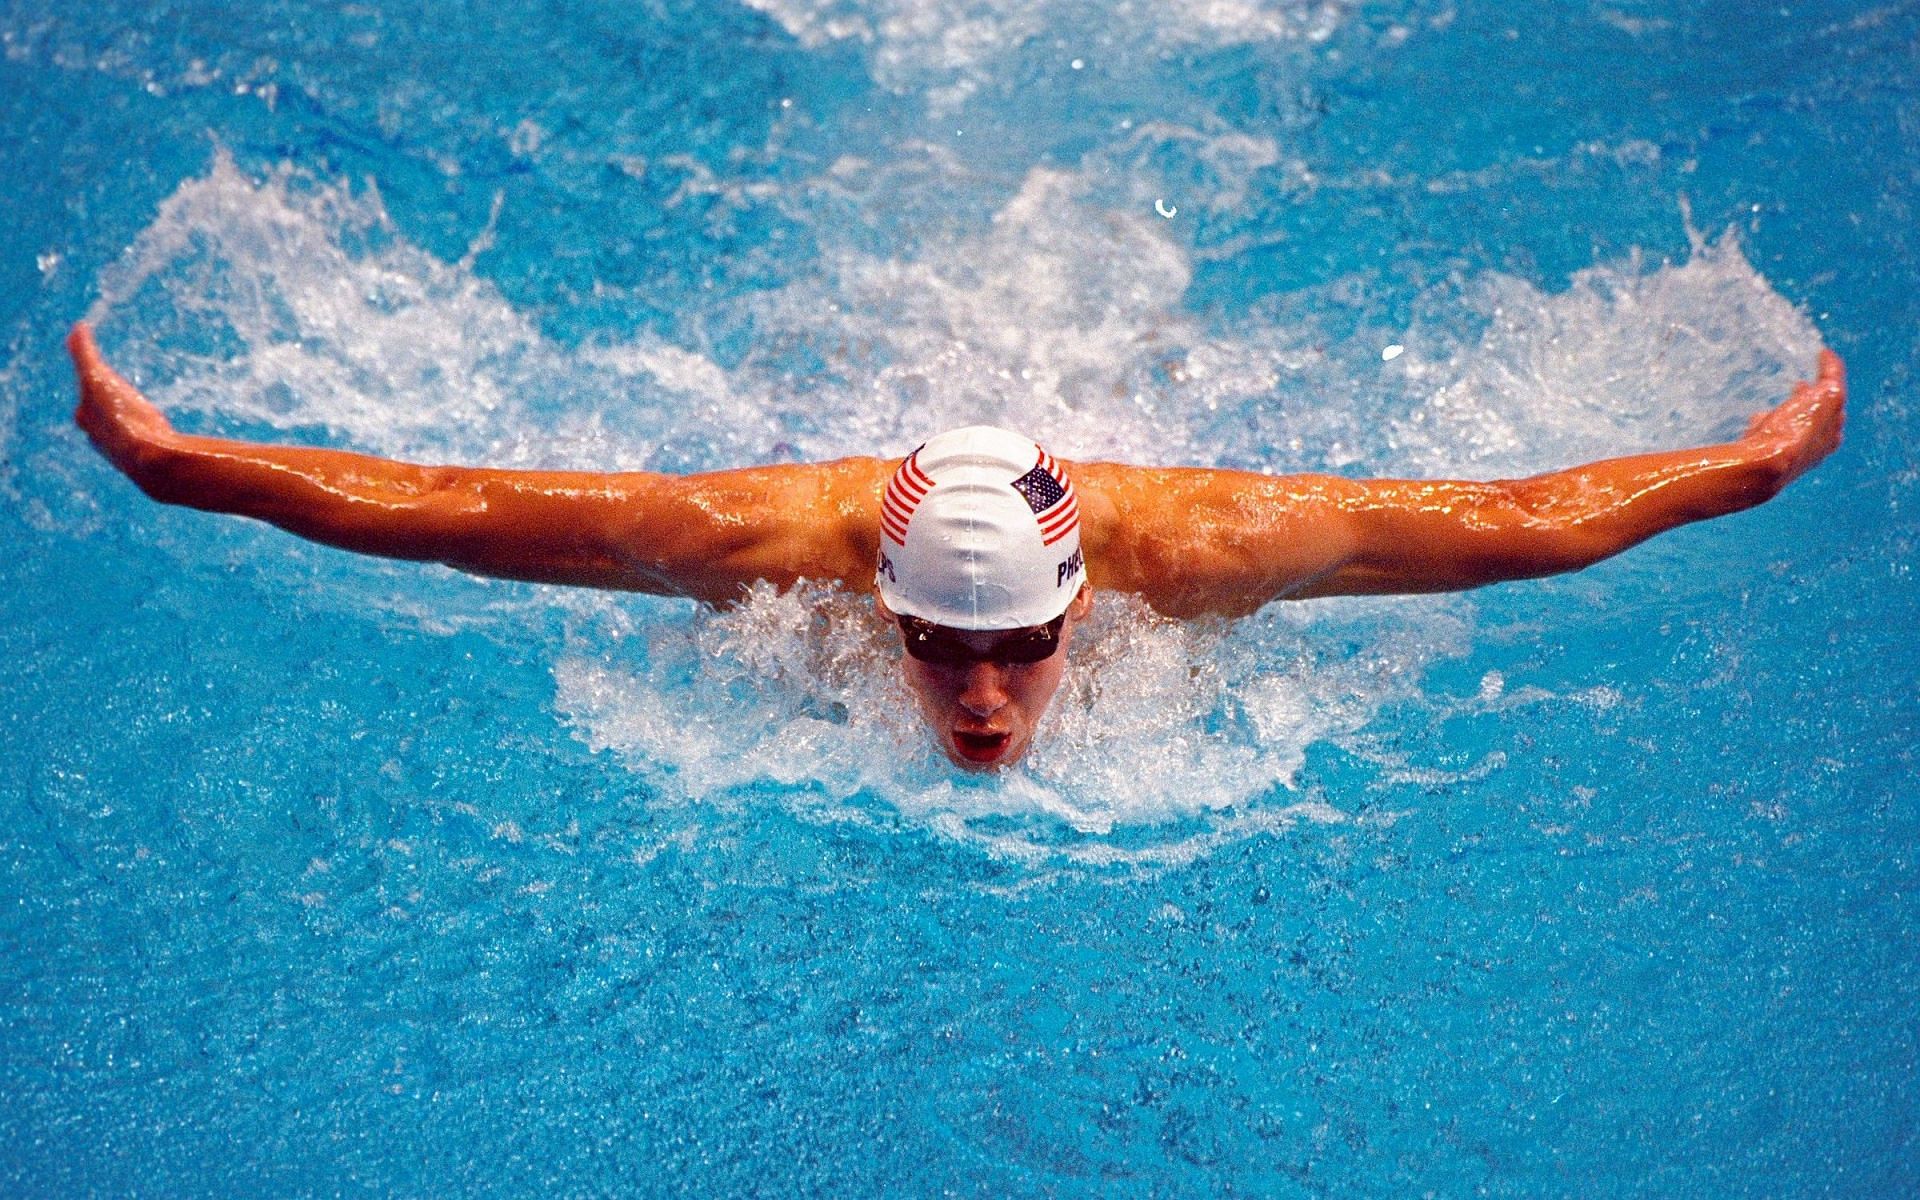 Michael Phelps during the Mens 200m Butterfly Heats at the Sydney International Aquatic Centre during the 2000 Olympic Games in Sydney, Australia